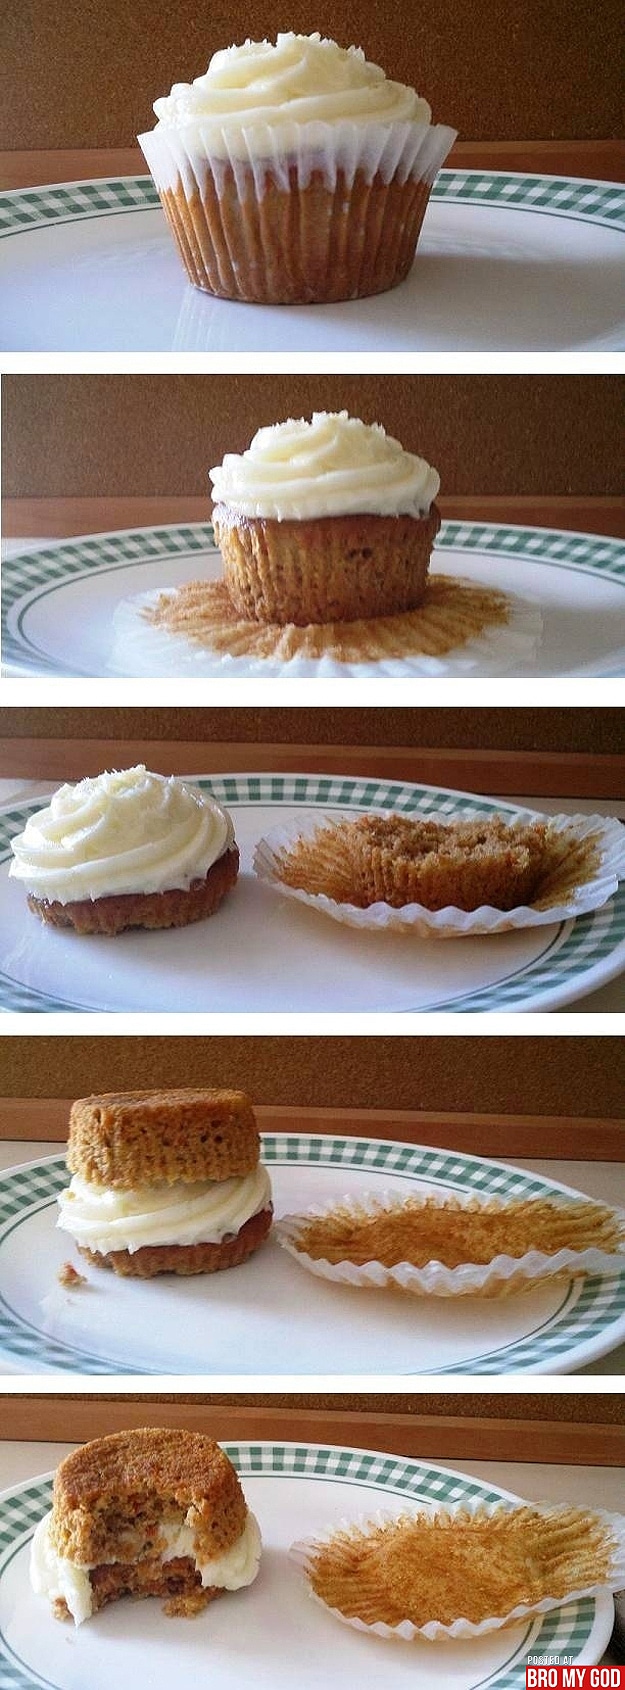 how-to-eat-a-cupcake